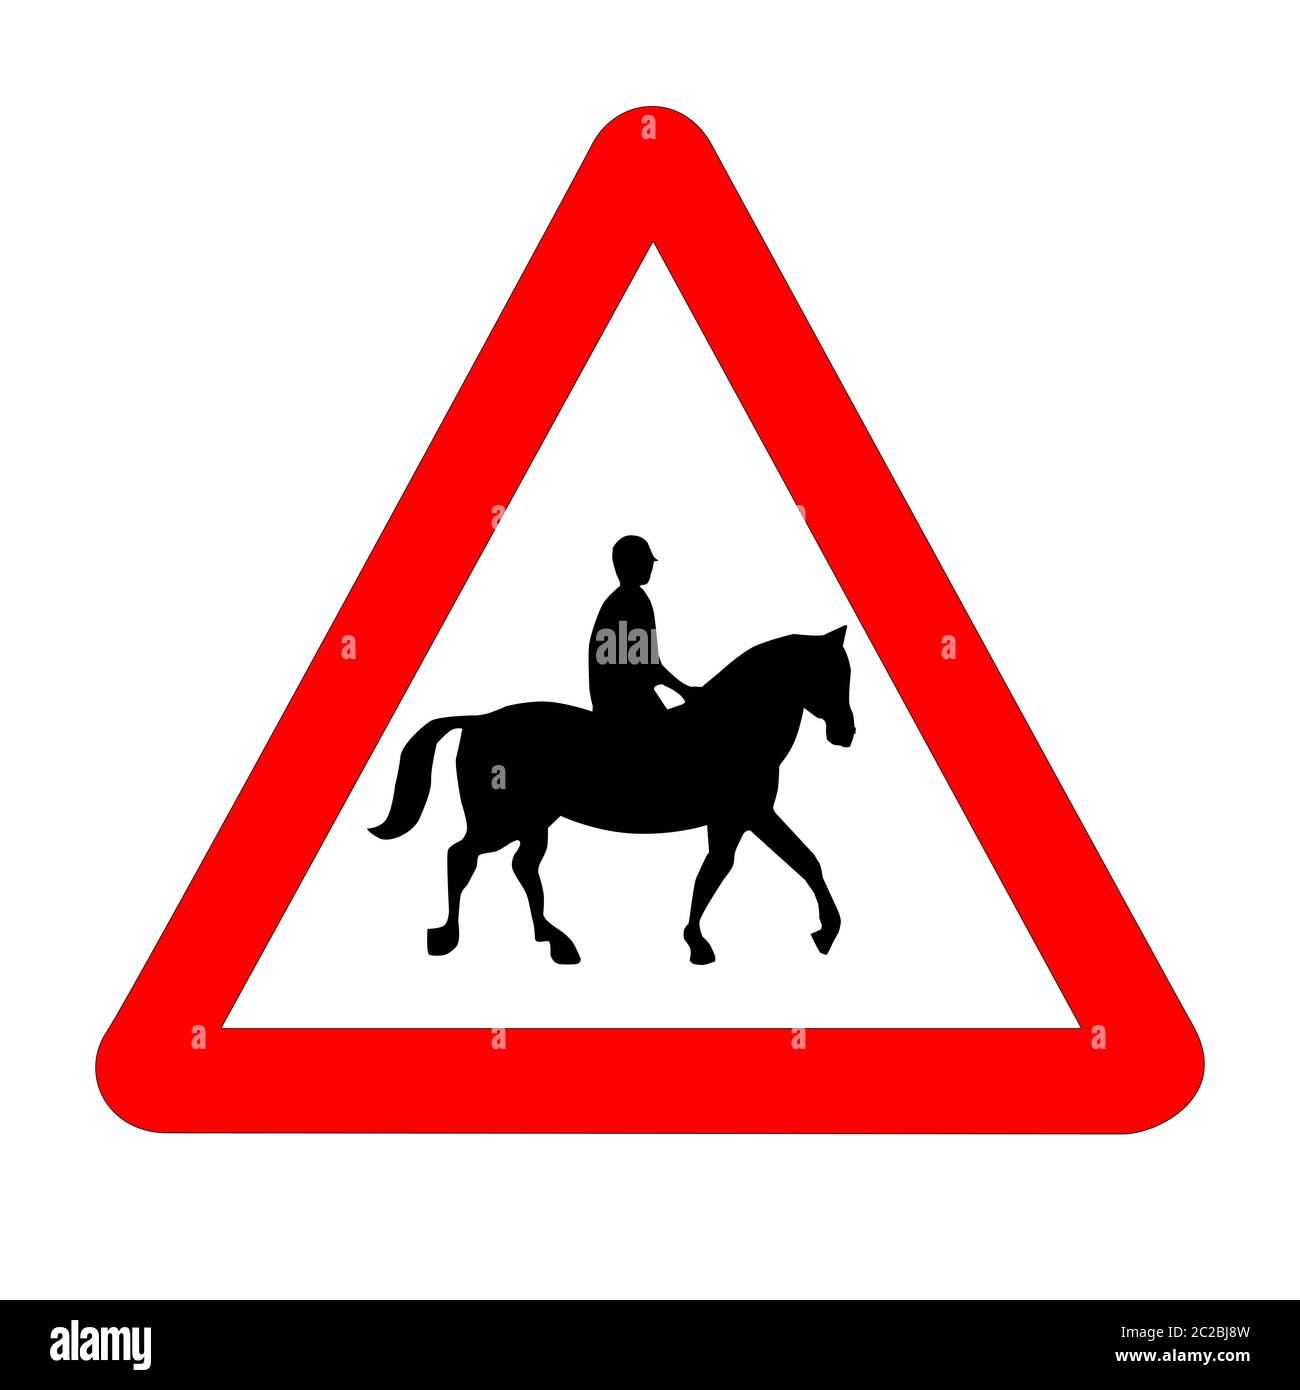 The traditional HORSE AND RIDER triangle, traffic sign isolated on a white background.. Stock Photo